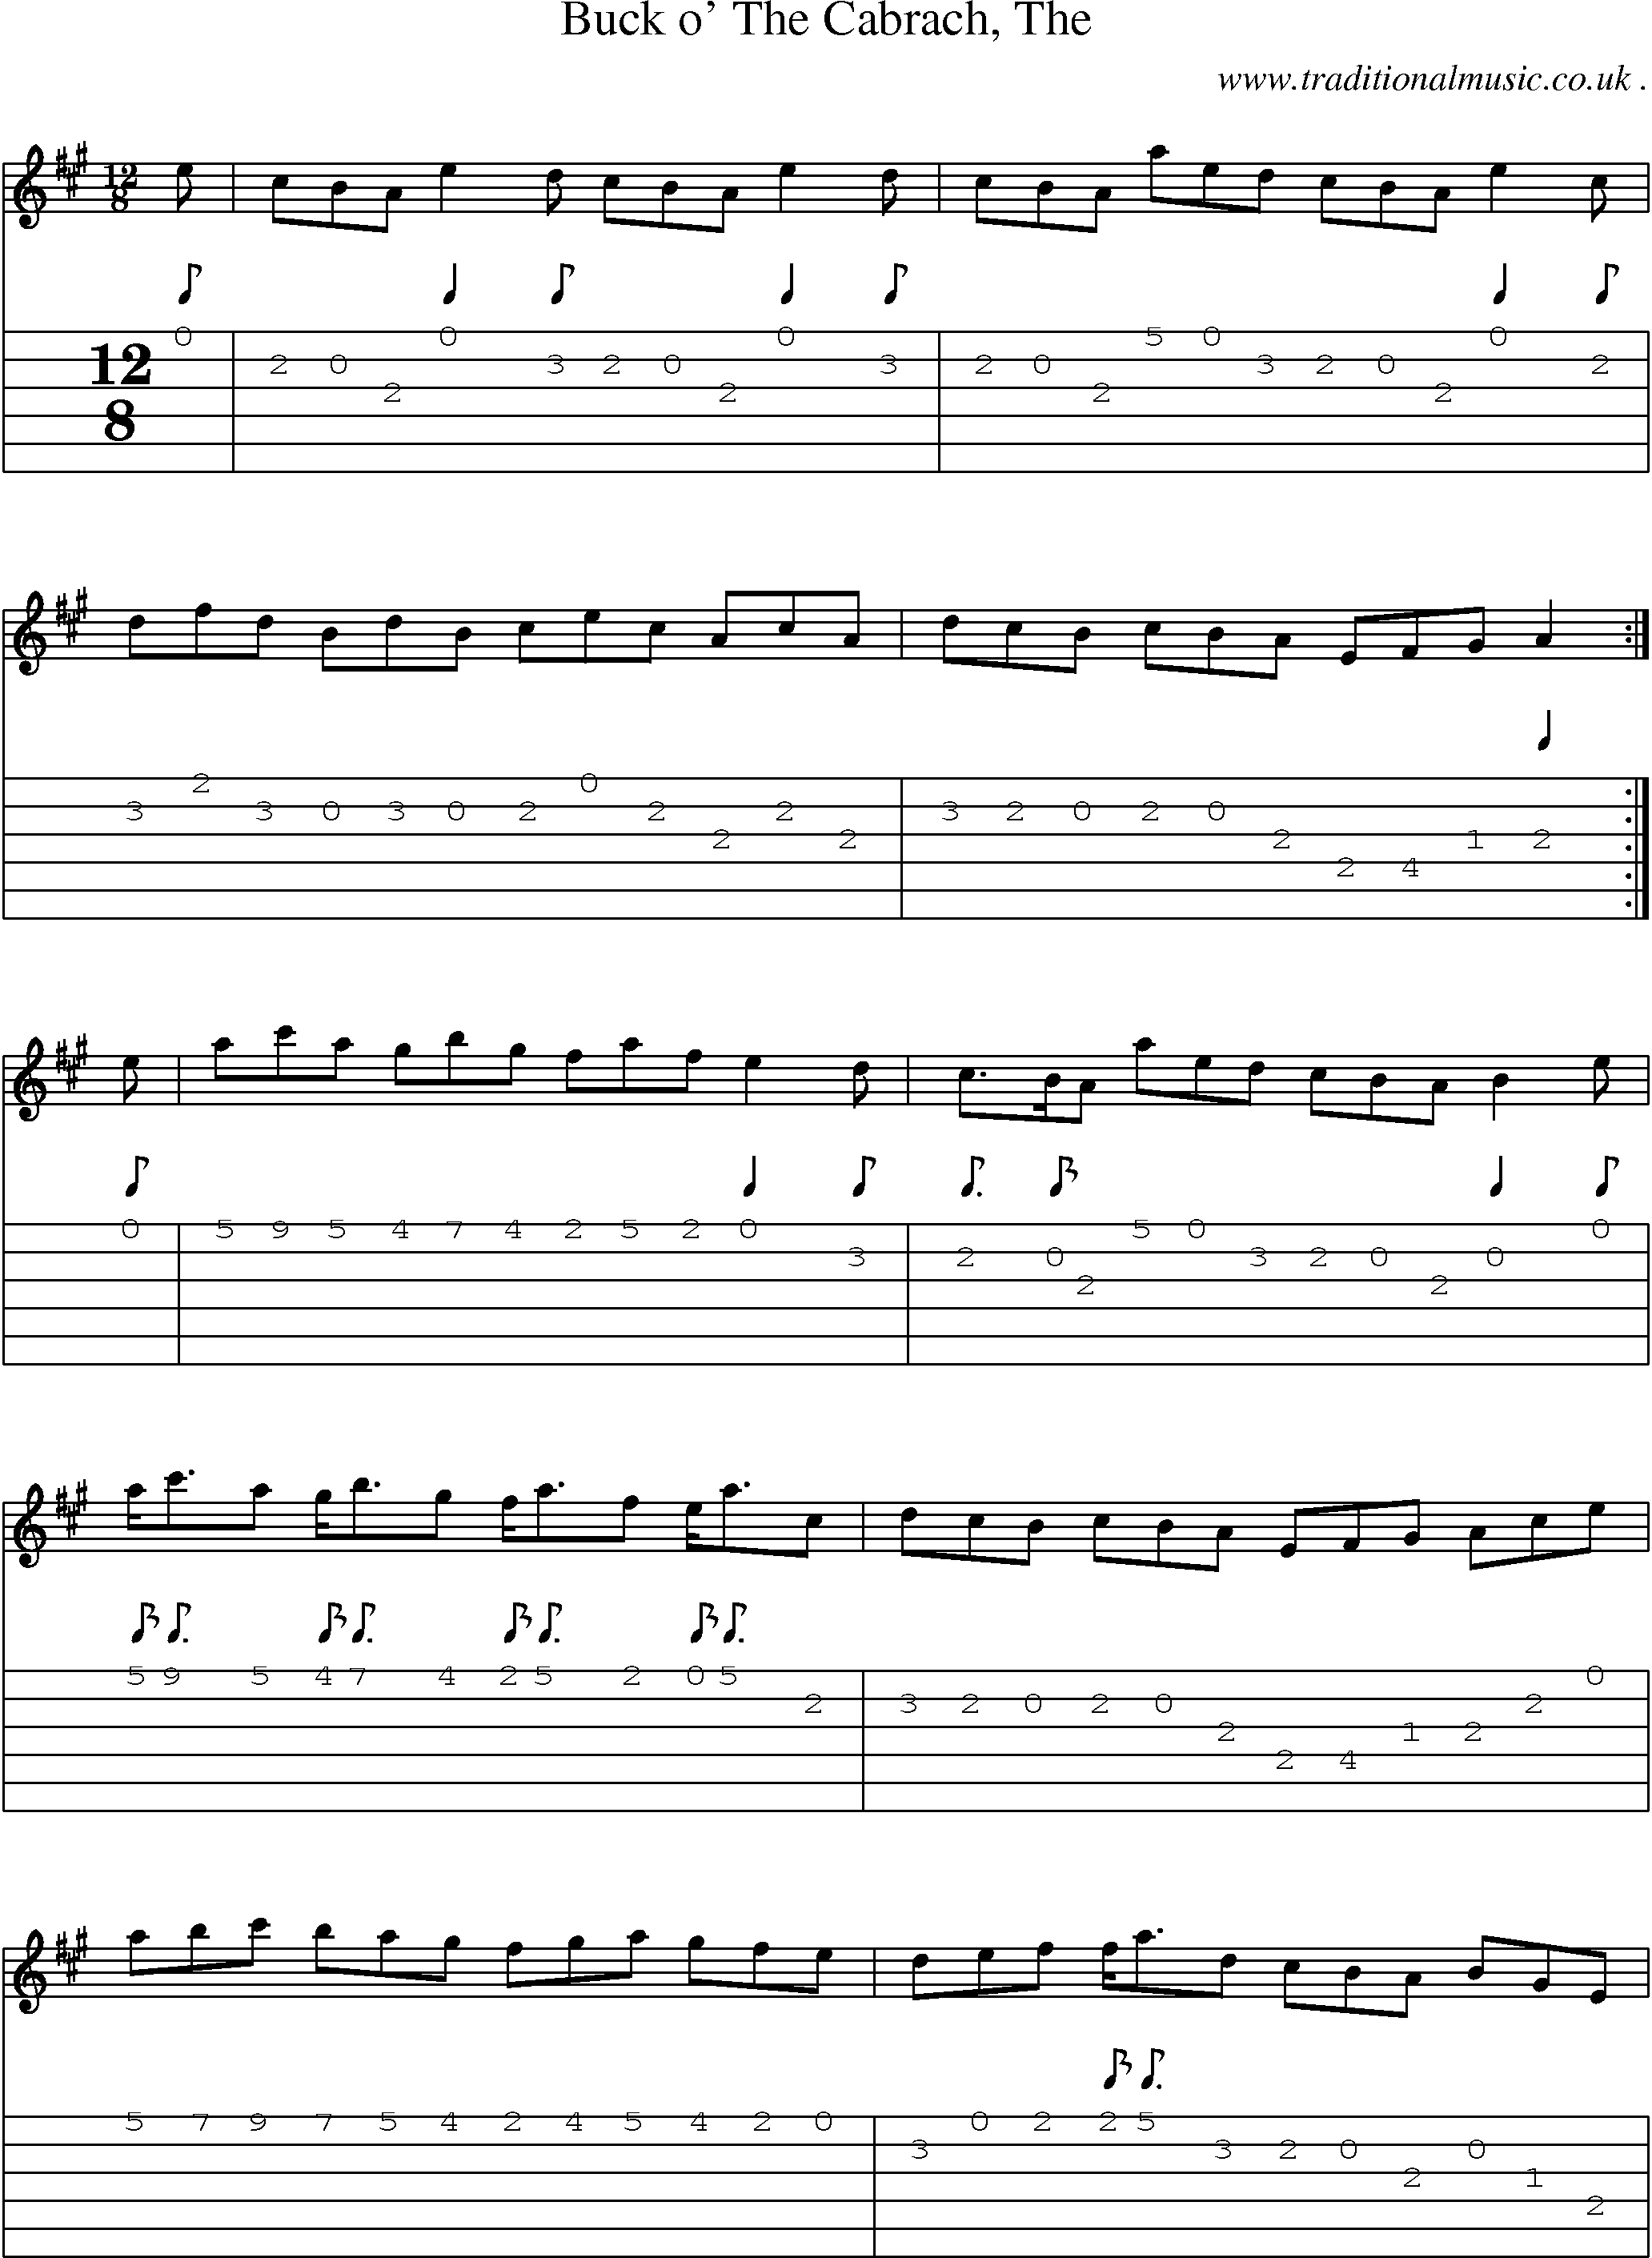 Sheet-music  score, Chords and Guitar Tabs for Buck O The Cabrach The